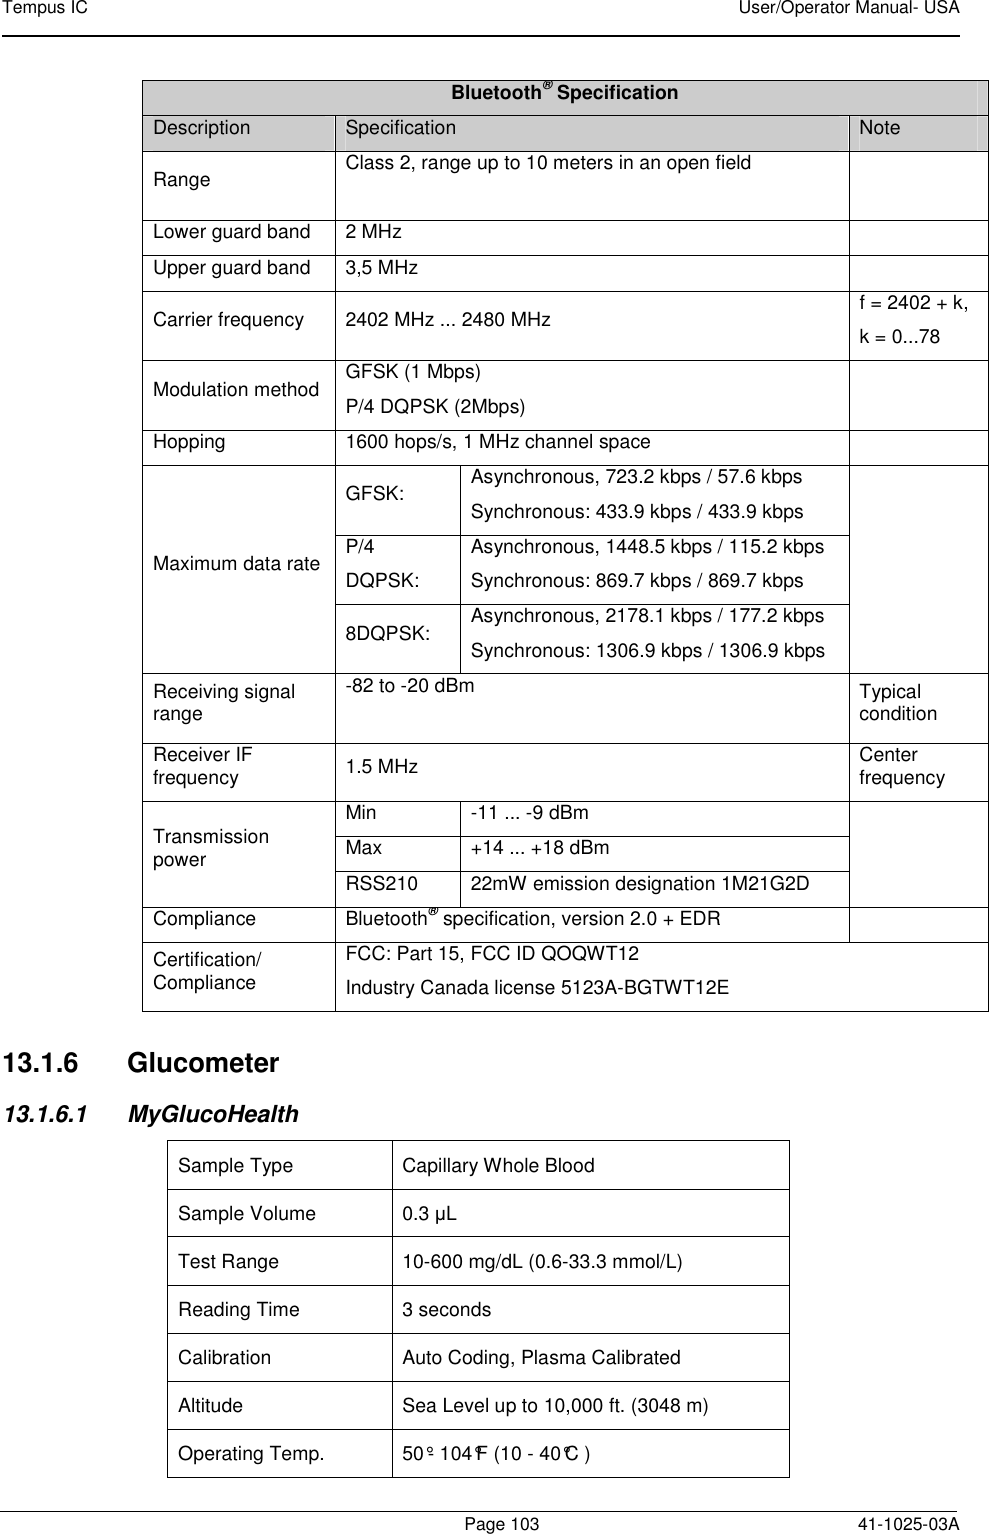 Tempus IC    User/Operator Manual- USA        Page 103   41-1025-03A Bluetooth® Specification Description  Specification  Note Range   Class 2, range up to 10 meters in an open field   Lower guard band  2 MHz   Upper guard band  3,5 MHz   Carrier frequency  2402 MHz ... 2480 MHz  f = 2402 + k, k = 0...78 Modulation method  GFSK (1 Mbps) P/4 DQPSK (2Mbps)   Hopping  1600 hops/s, 1 MHz channel space   Maximum data rate GFSK:  Asynchronous, 723.2 kbps / 57.6 kbps Synchronous: 433.9 kbps / 433.9 kbps  P/4 DQPSK: Asynchronous, 1448.5 kbps / 115.2 kbps Synchronous: 869.7 kbps / 869.7 kbps 8DQPSK:  Asynchronous, 2178.1 kbps / 177.2 kbps Synchronous: 1306.9 kbps / 1306.9 kbps Receiving signal range -82 to -20 dBm  Typical condition Receiver IF frequency  1.5 MHz  Center  frequency Transmission power Min  -11 ... -9 dBm  Max  +14 ... +18 dBm RSS210  22mW emission designation 1M21G2D Compliance  Bluetooth® specification, version 2.0 + EDR   Certification/ Compliance FCC: Part 15, FCC ID QOQWT12 Industry Canada license 5123A-BGTWT12E  13.1.6  Glucometer 13.1.6.1  MyGlucoHealth Sample Type   Capillary Whole Blood  Sample Volume   0.3 µL  Test Range   10-600 mg/dL (0.6-33.3 mmol/L)  Reading Time   3 seconds  Calibration   Auto Coding, Plasma Calibrated  Altitude   Sea Level up to 10,000 ft. (3048 m)  Operating Temp.   50°- 104°F (10 - 40°C )  